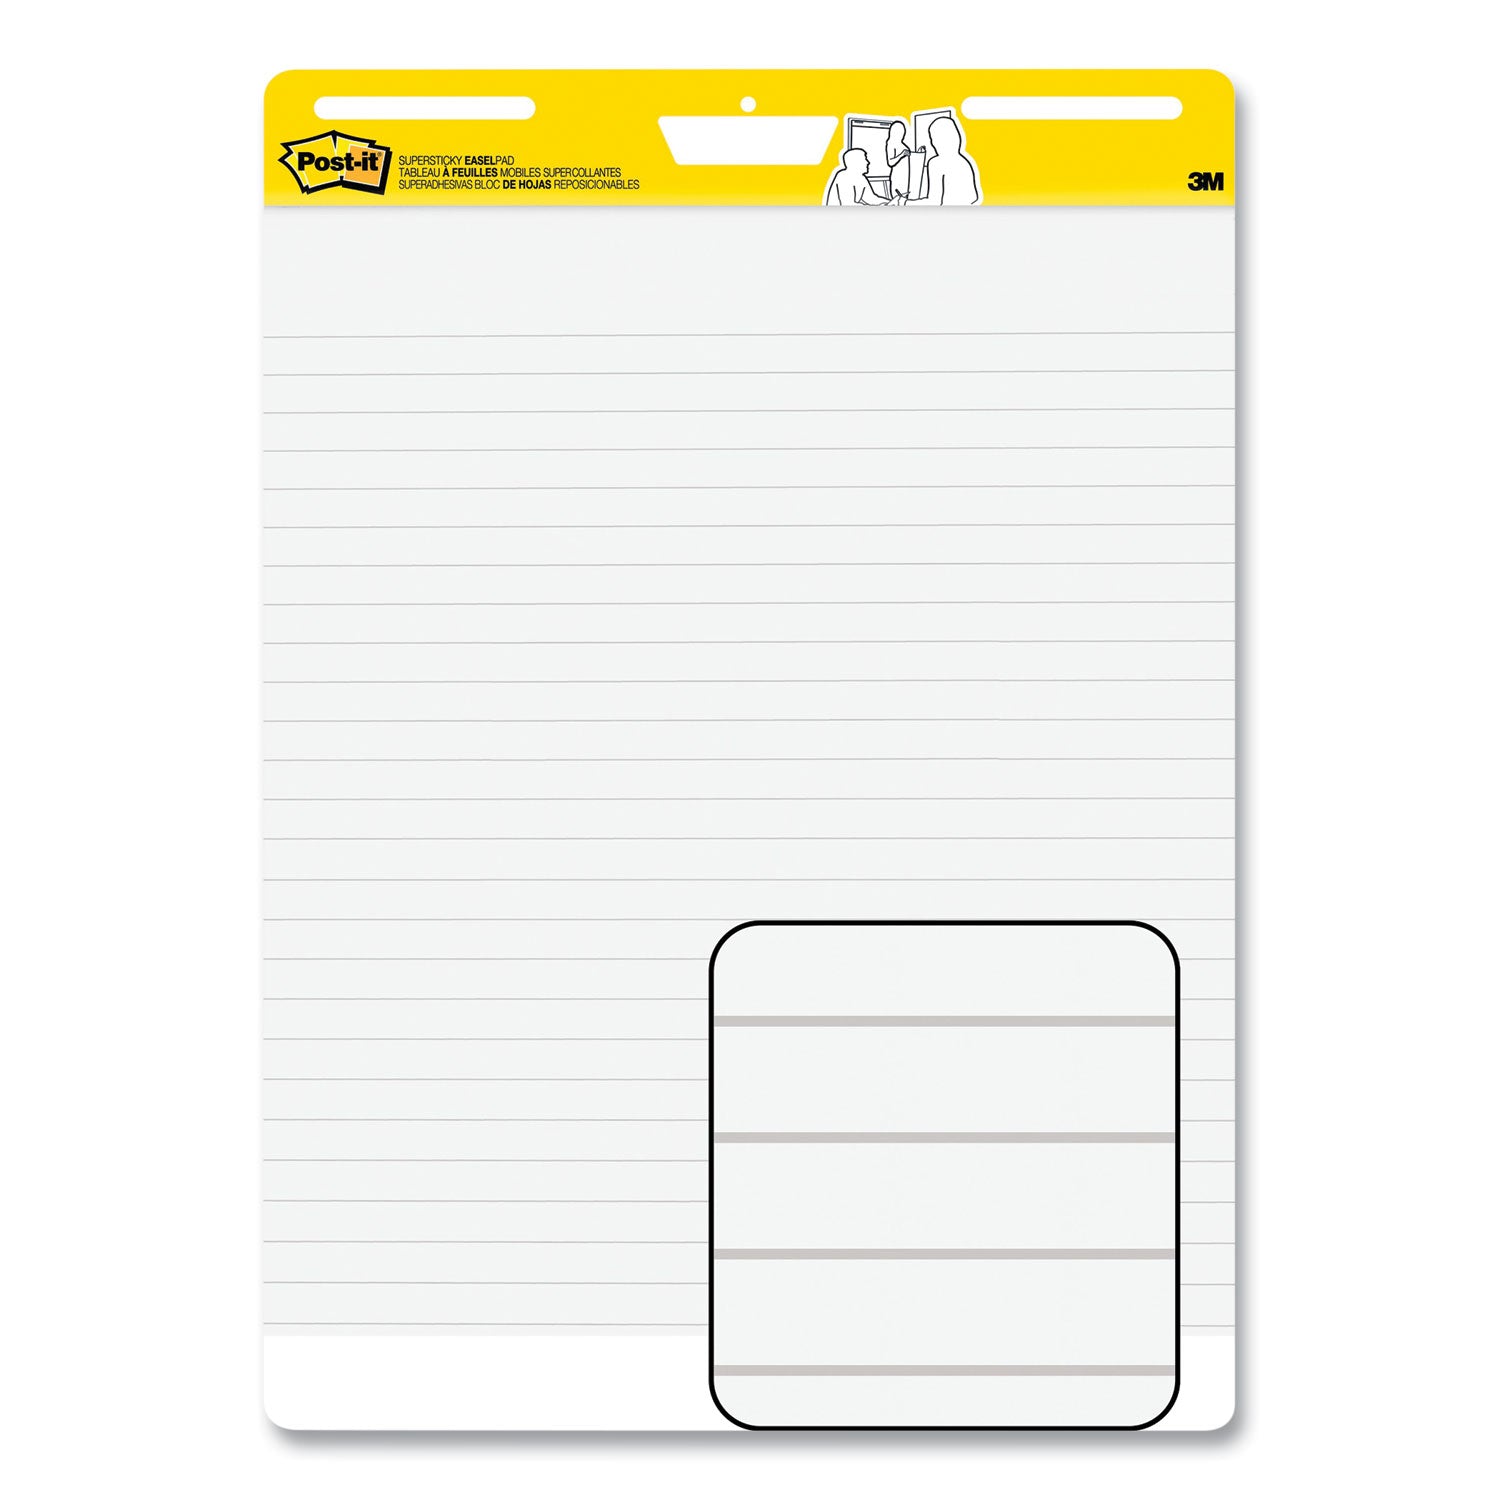 vertical-orientation-self-stick-easel-pads-wide-ruled-25-x-30-white-30-sheets-pad-6-pads-pack_mmm561wlvad6pk - 3